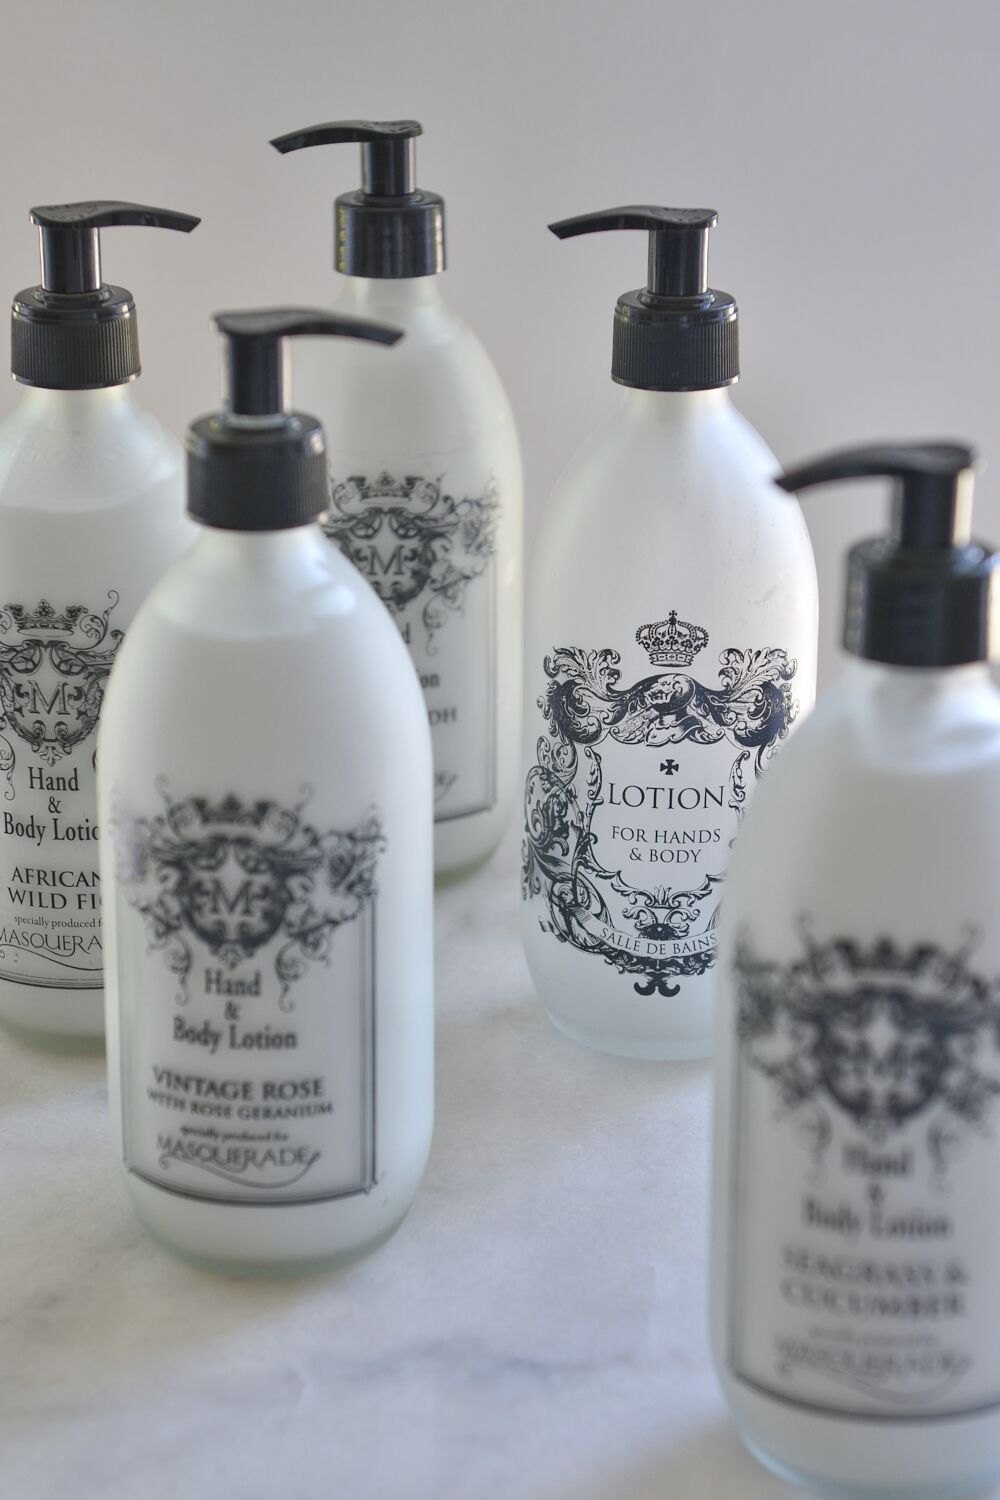 Hand and Body Lotions | Masquerade